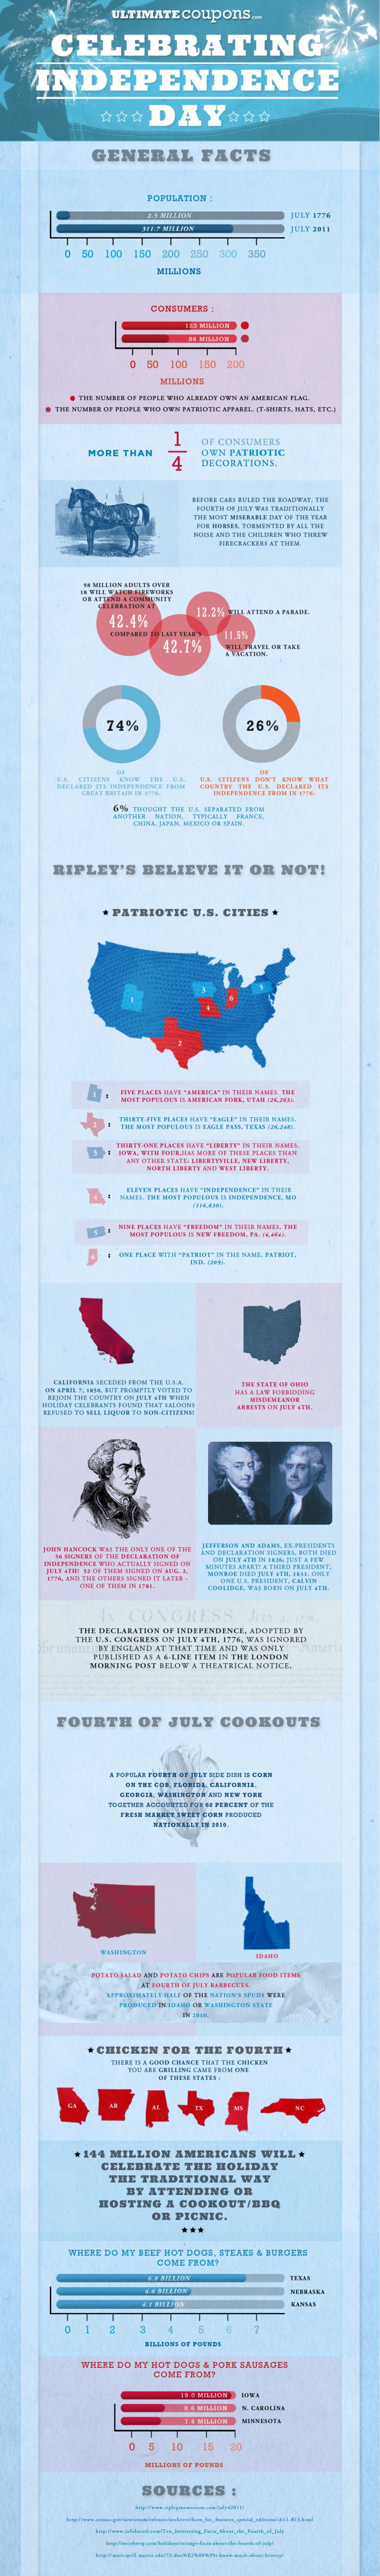 Celebrating Independence Day [Infographic]